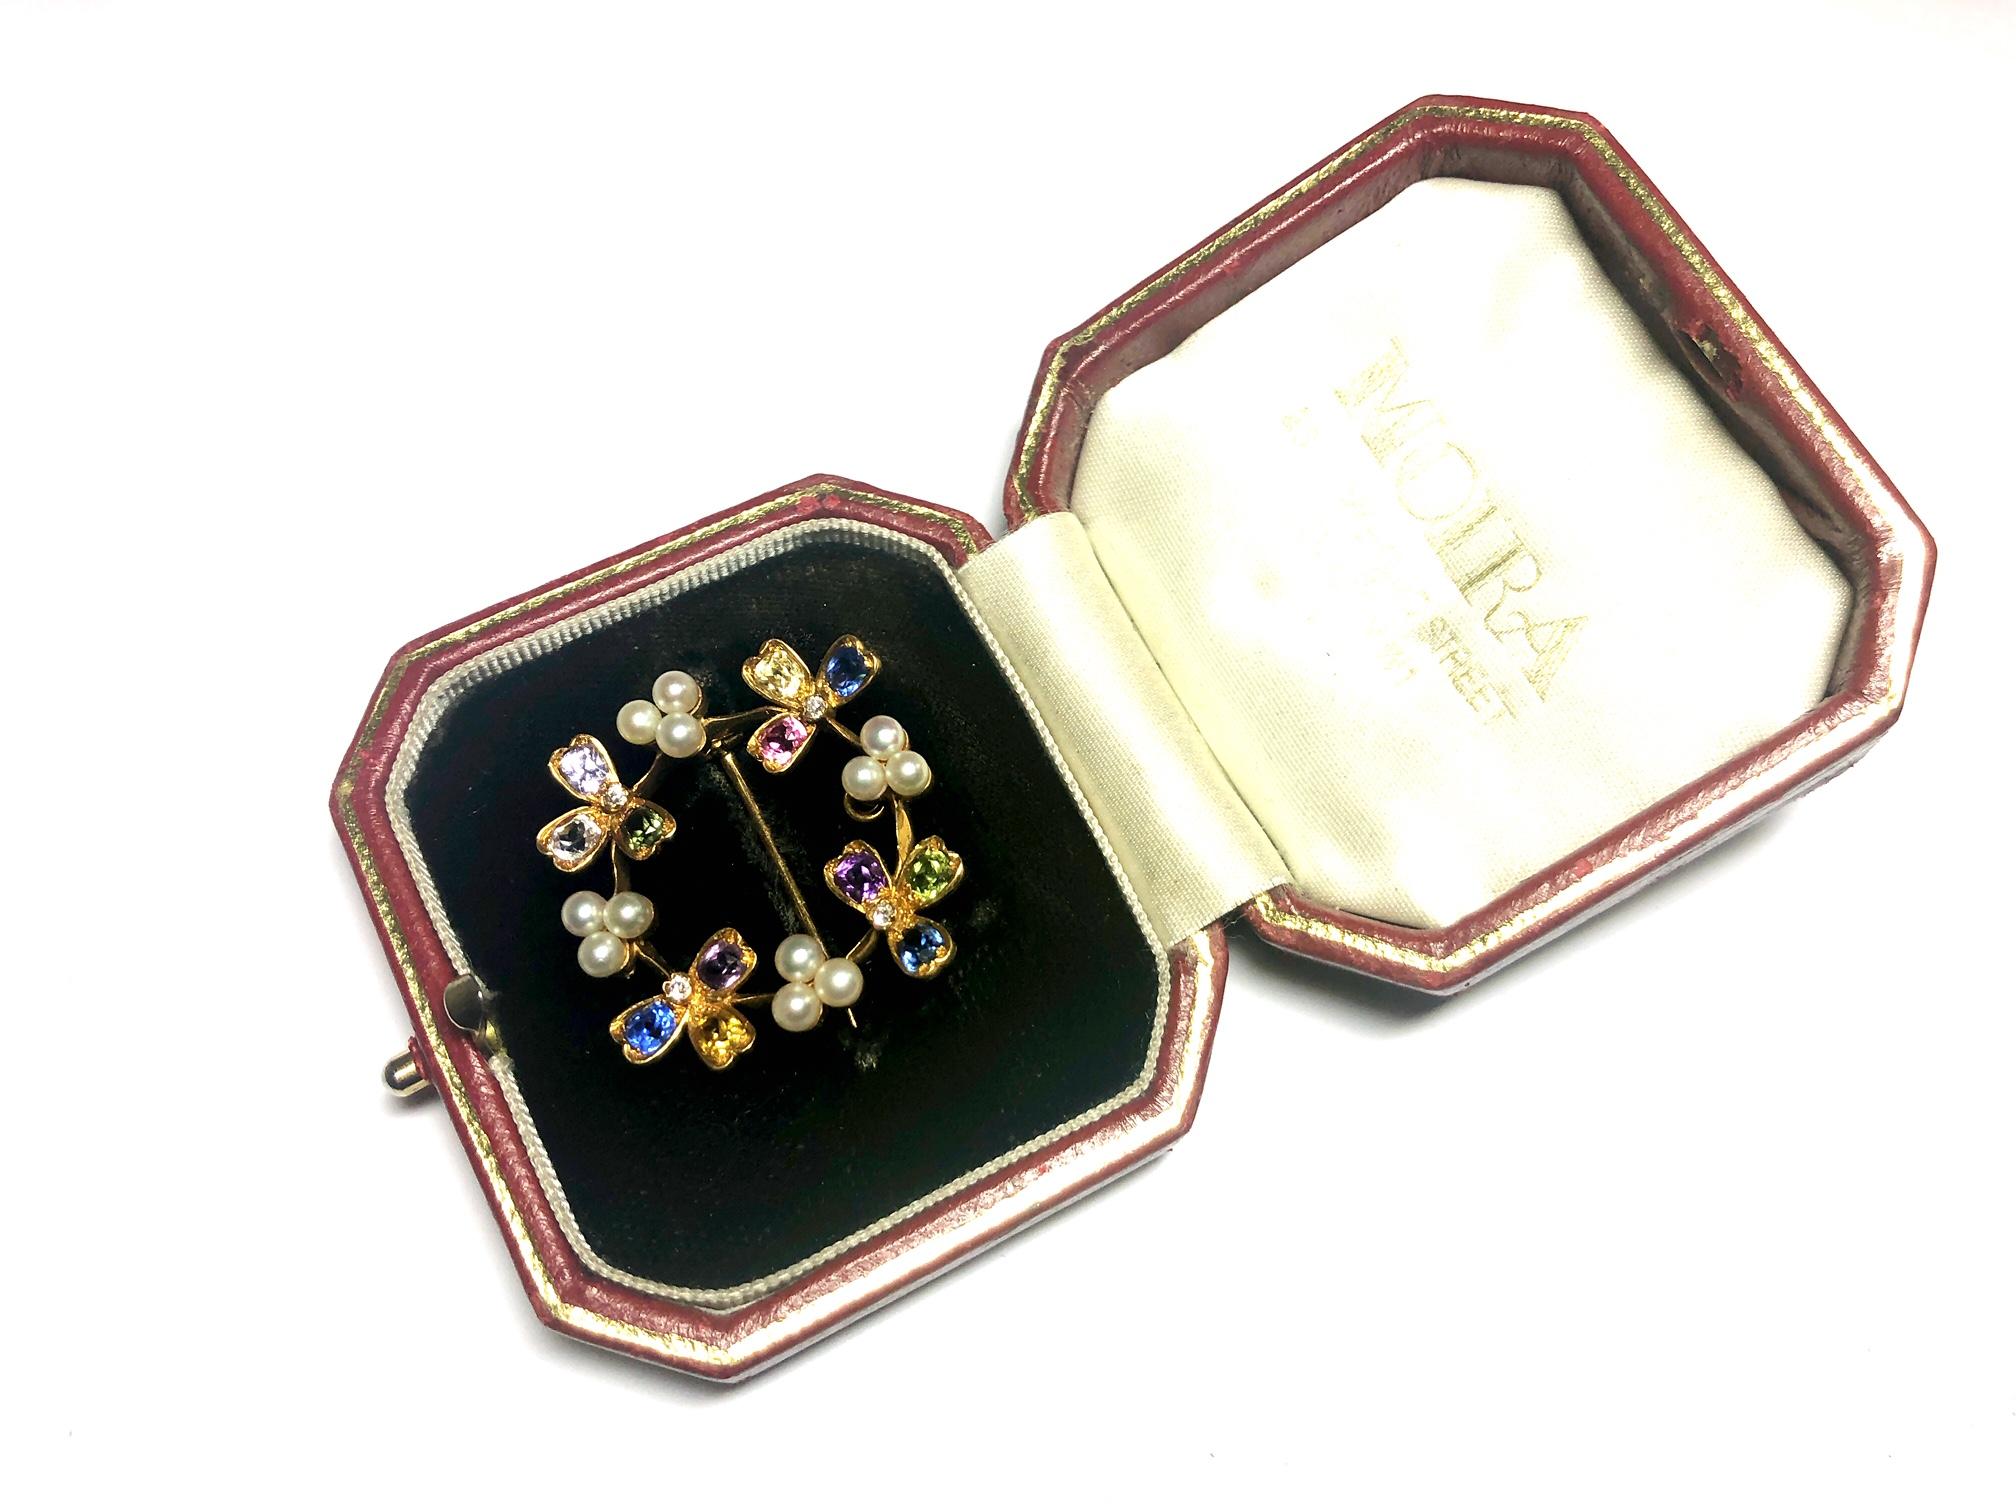 Retro Vintage Tiffany & Co. Gem Set Pearl and Gold Pendant Brooch, circa 1937 For Sale